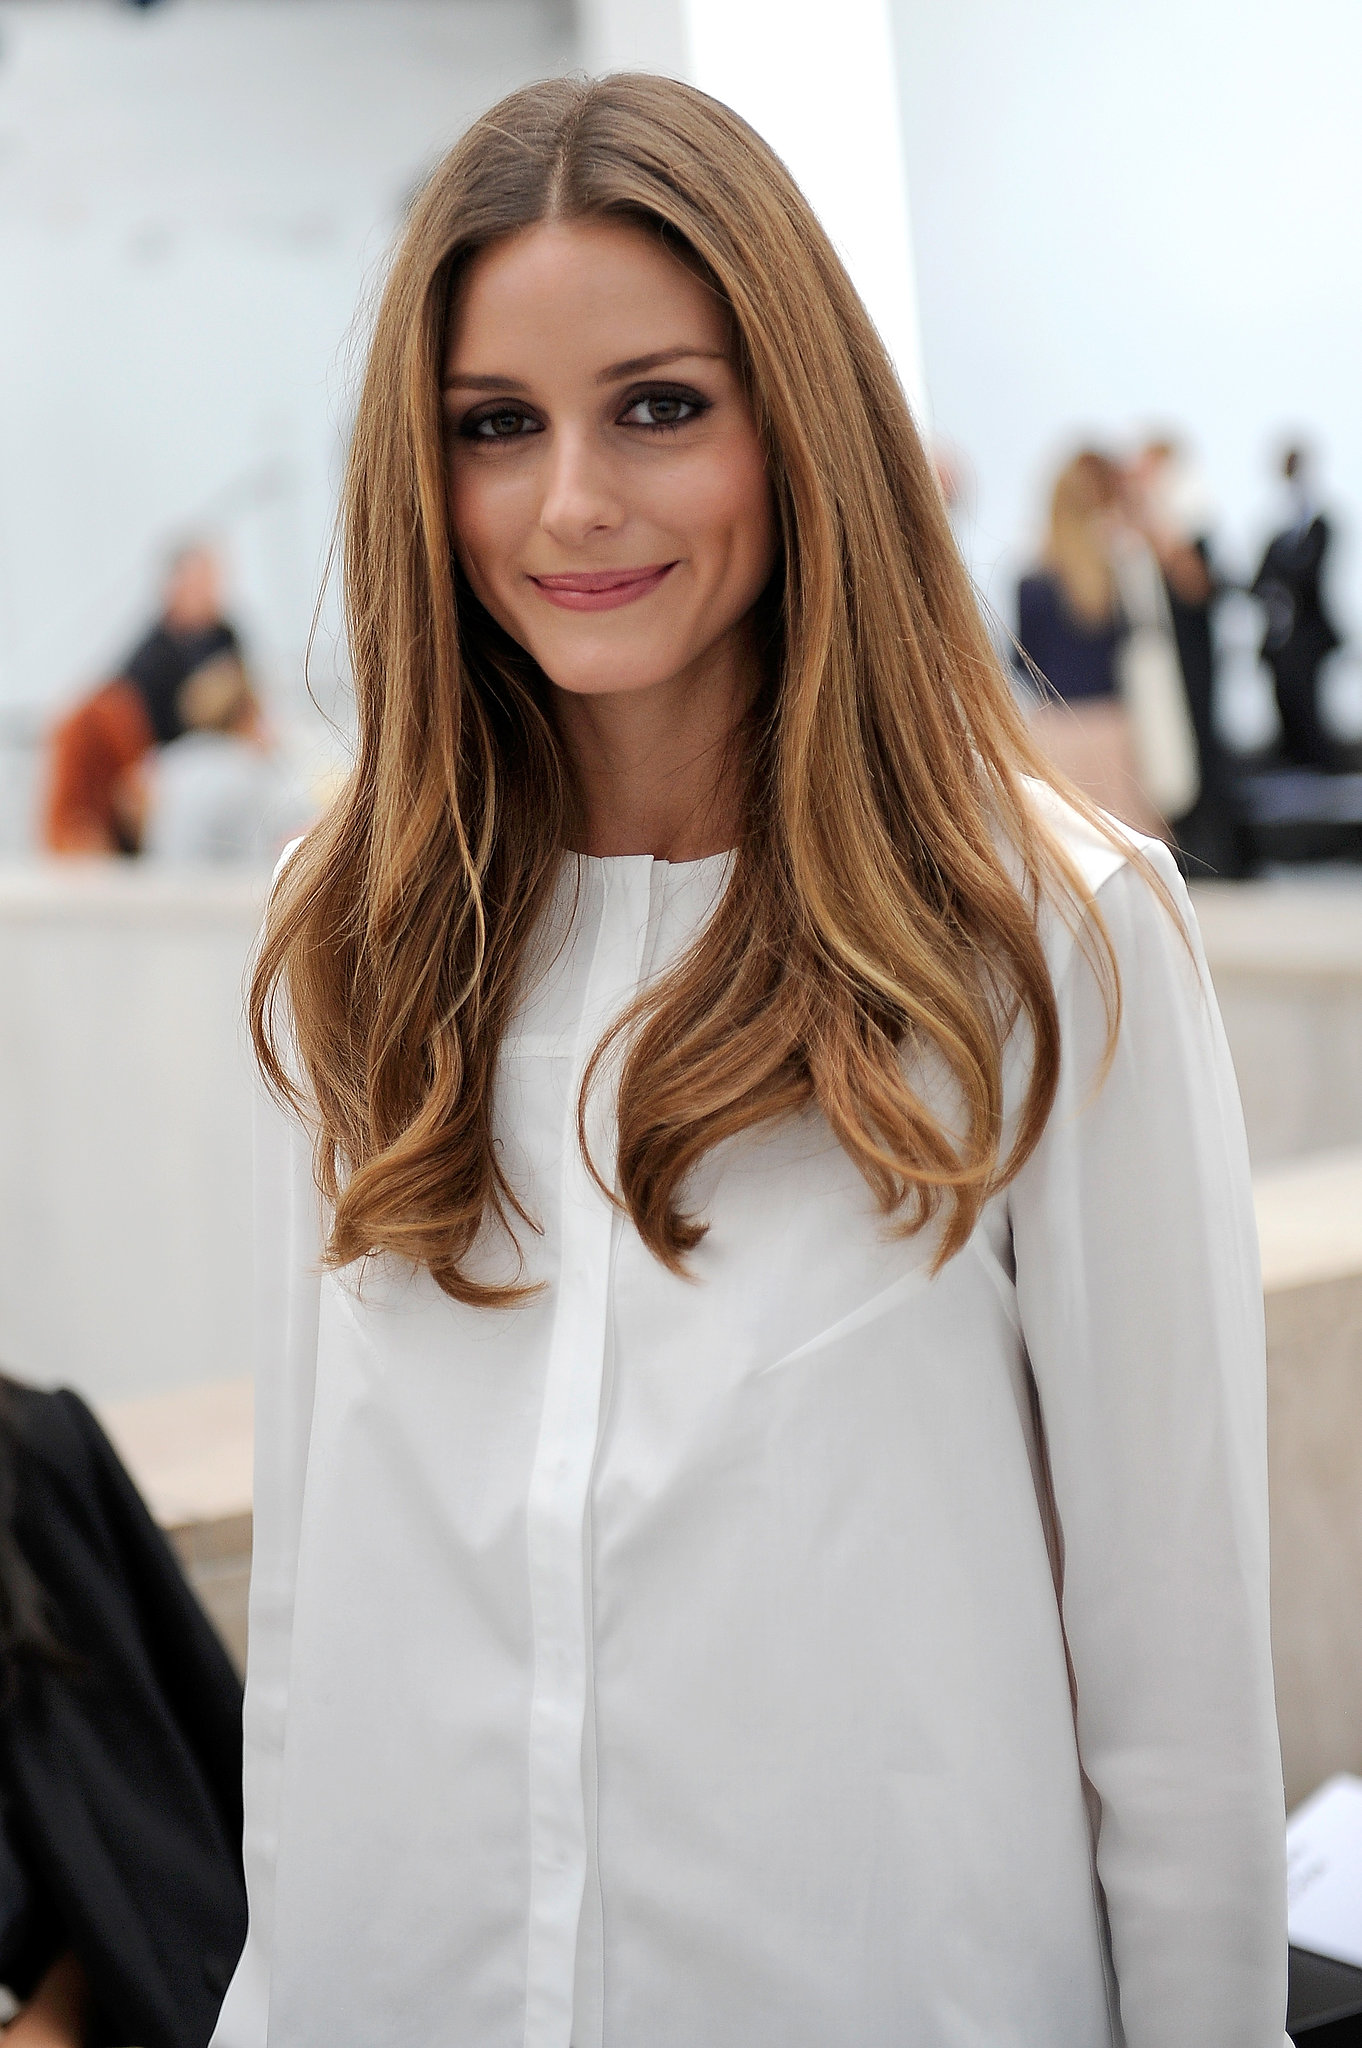 Image result for olivia palermo